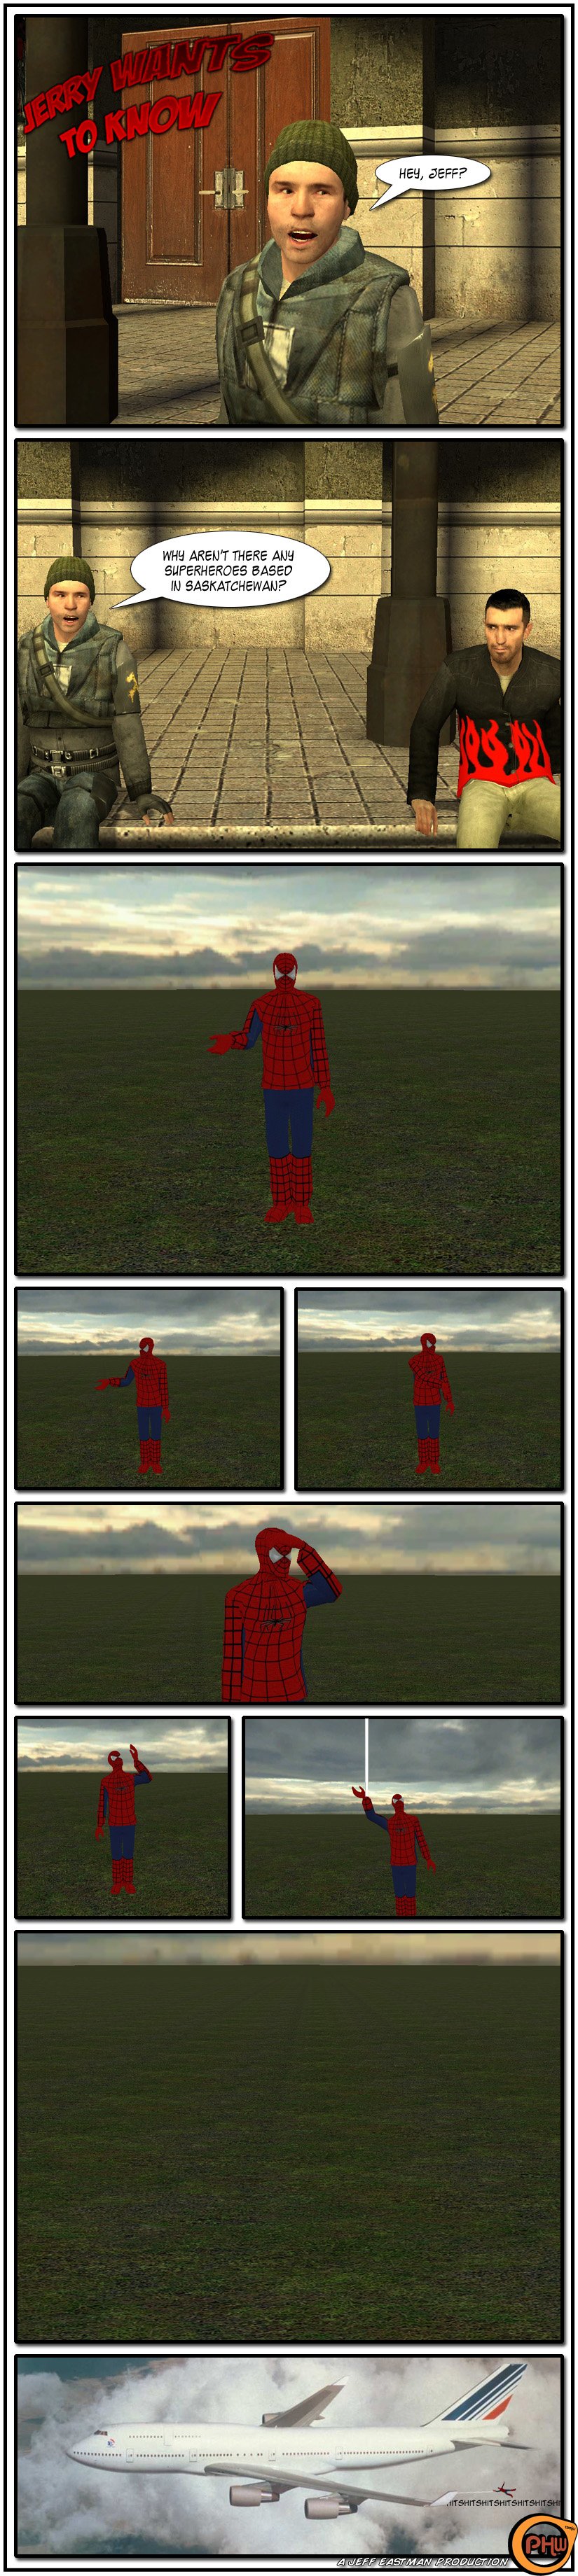 Jerry is hanging out with Jeff and asks him why there aren't any superheroes based in Saskatchewan. We cut to a skit of Spider-Man in the middle of an open green field, wondering where he can shoot a web. Spider-Man looks to his right, then to his left, then tries to spot anything in the distance. He then looks up and finds something, so he shoots a web and vanishes. We then see him screaming while hanging from a plane. The end.